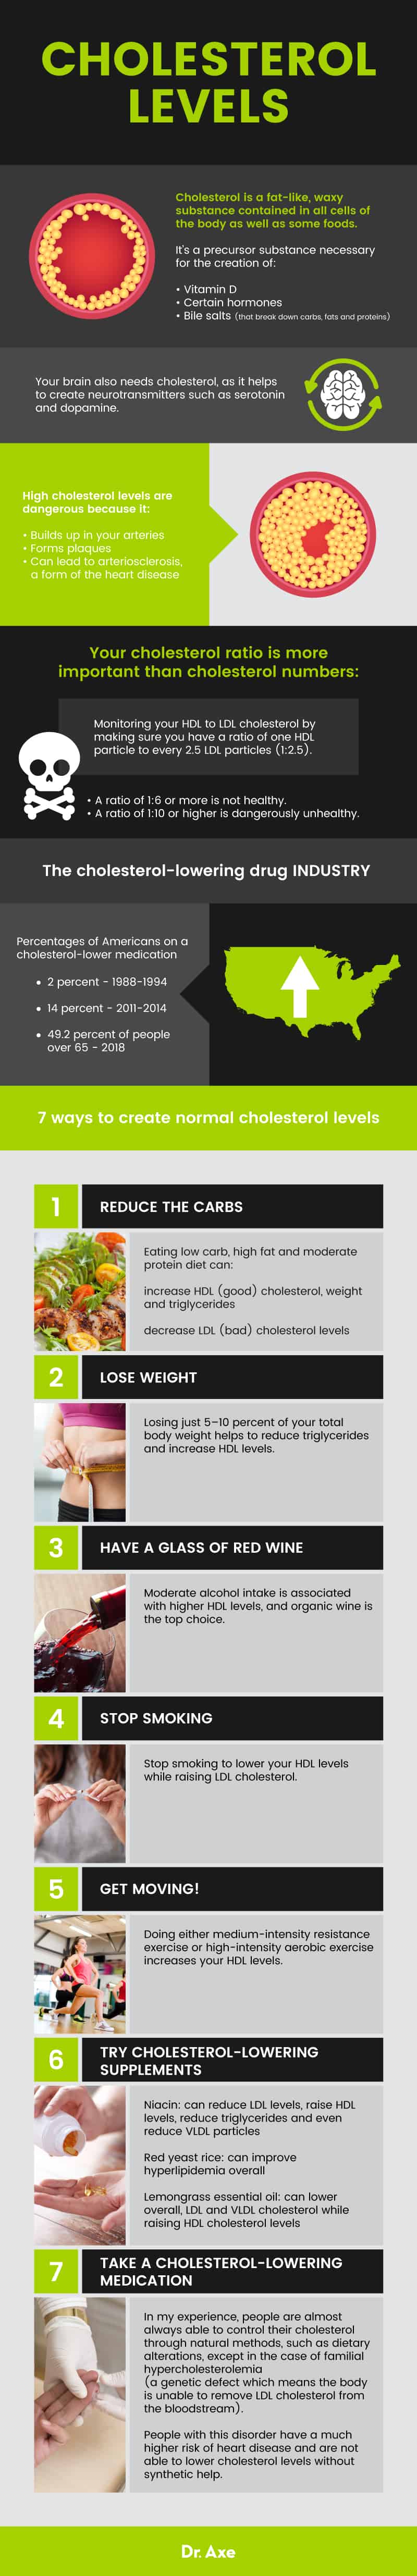 Normal cholesterol levels - Dr. Axe